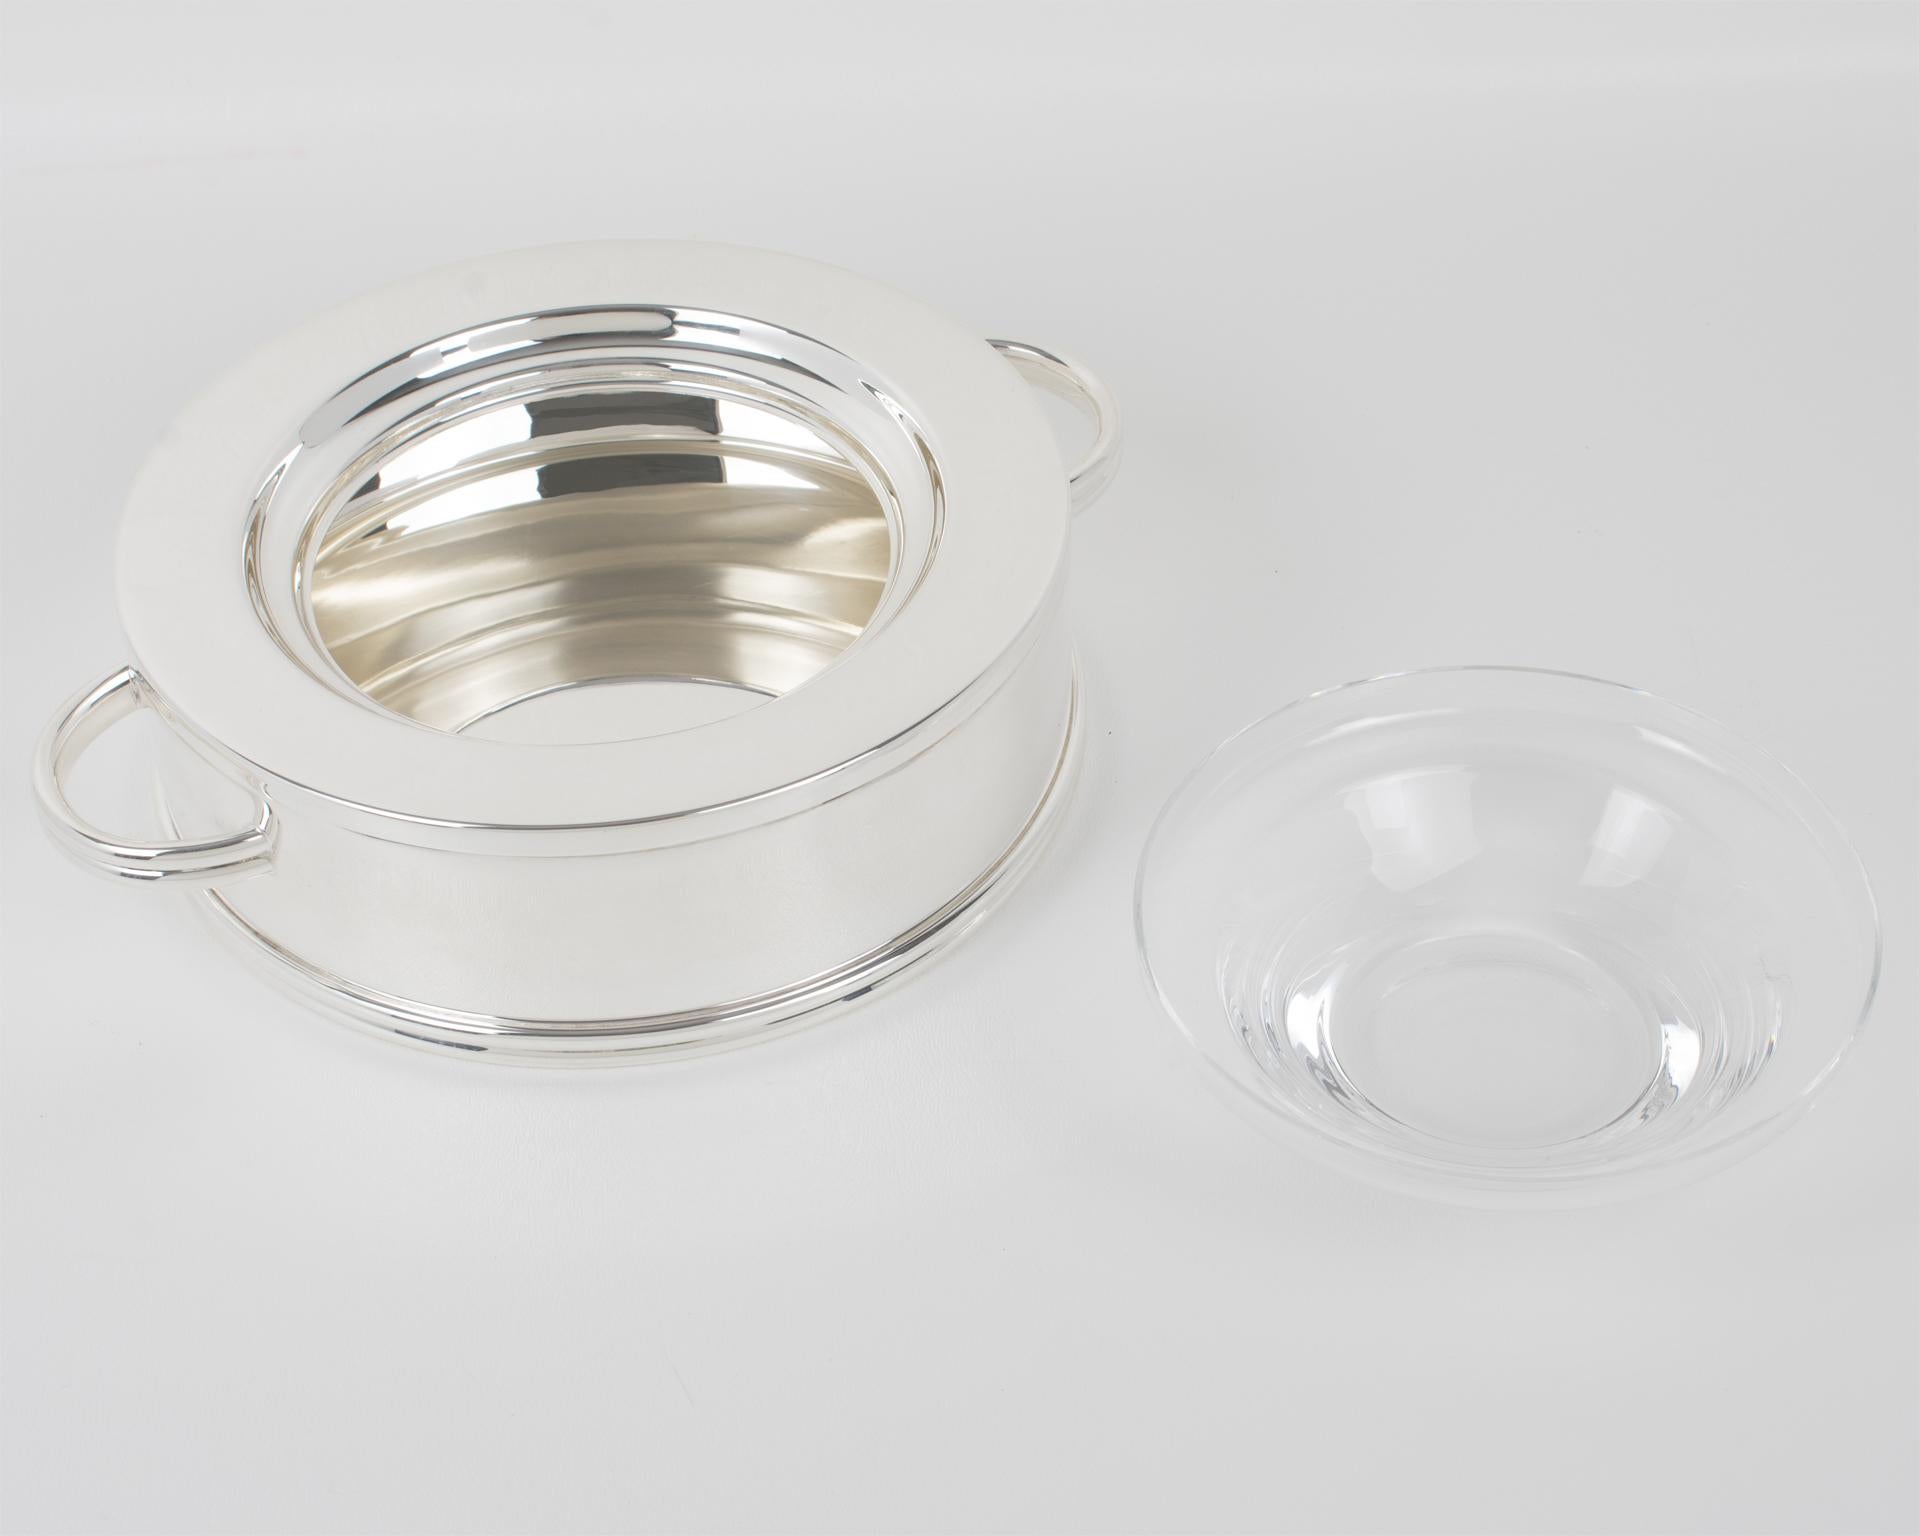 Mid-20th Century Silver Plate and Crystal Caviar Bowl Dish Server by St Hilaire, Paris